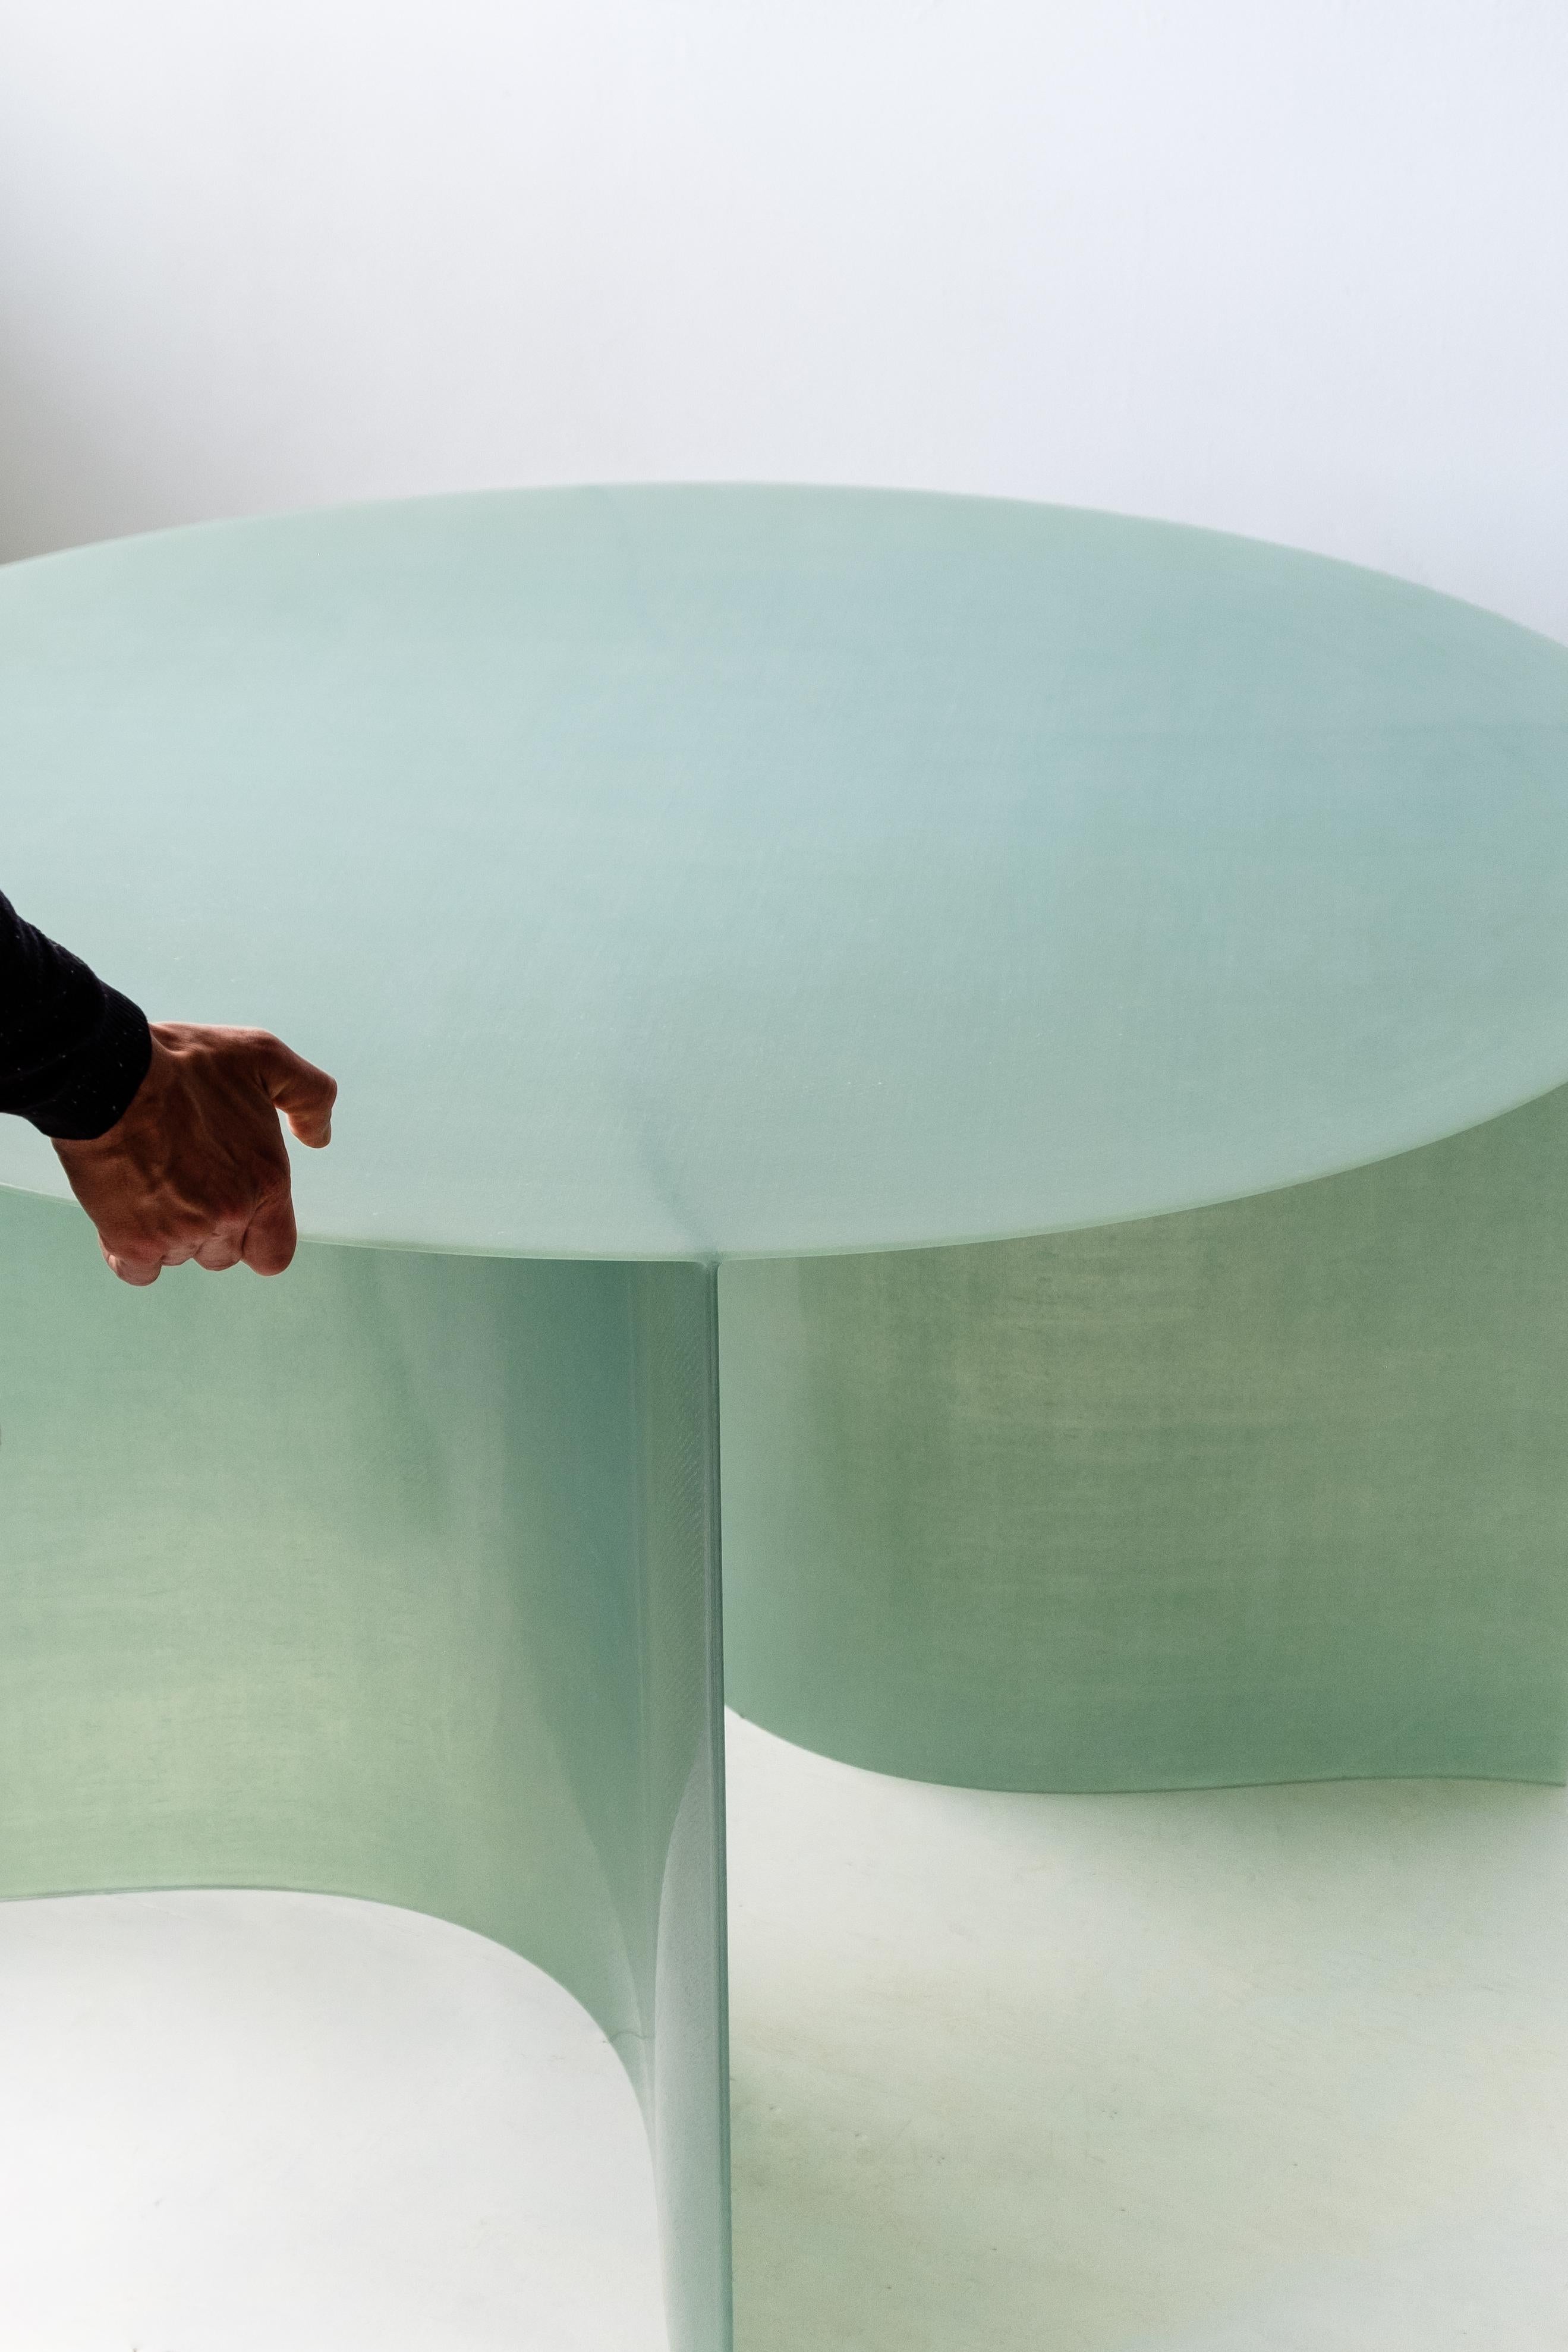 Resin Contemporary Light Green Fiberglass, New Wave Dining Table 150 D, by Lukas Cober